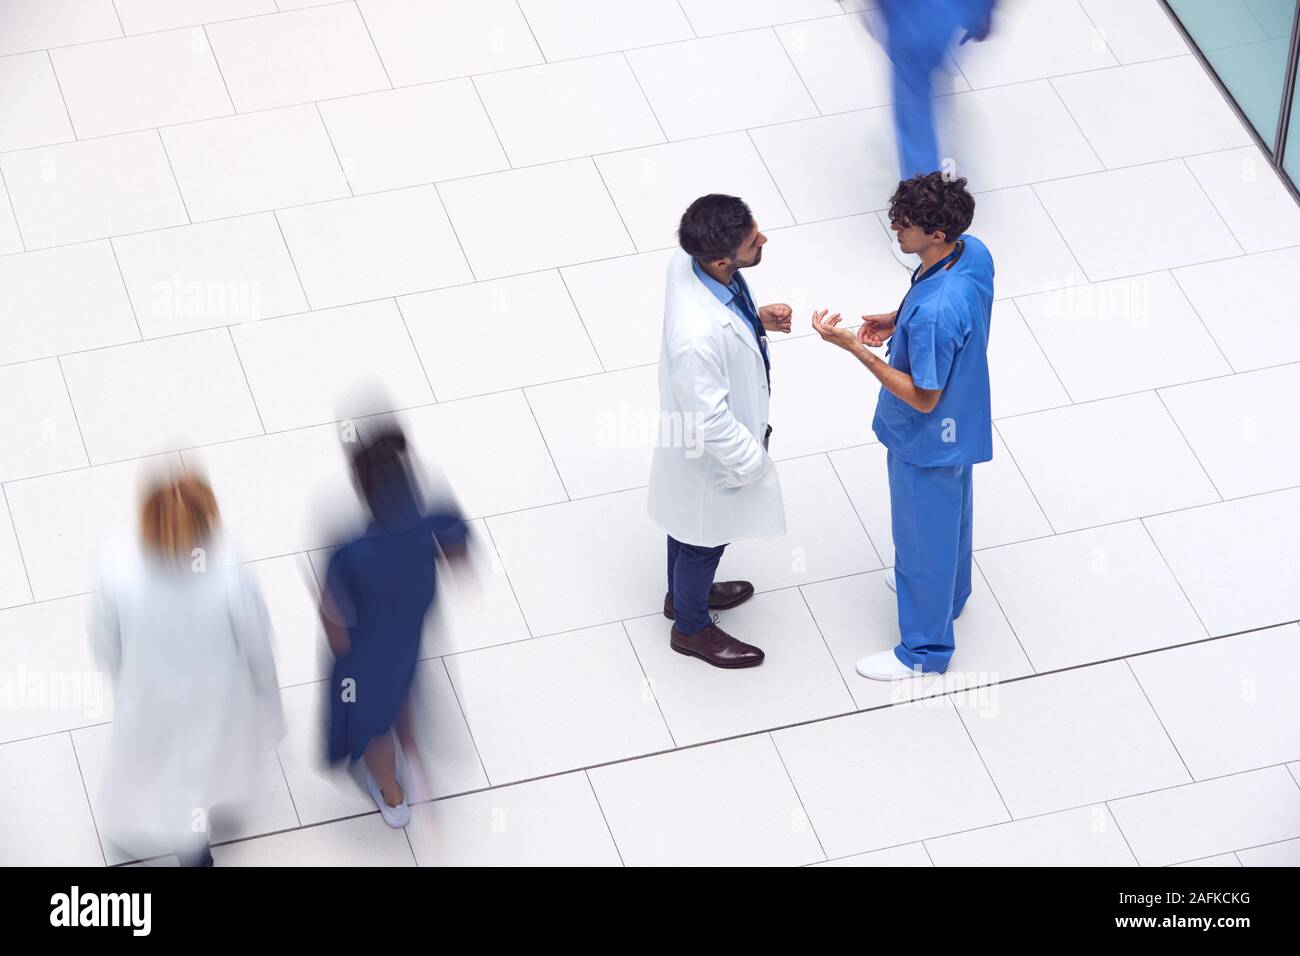 Overhead View Of Male Medical Staff Having Informal Meeting In Lobby Of Modern Hospital Building Stock Photo